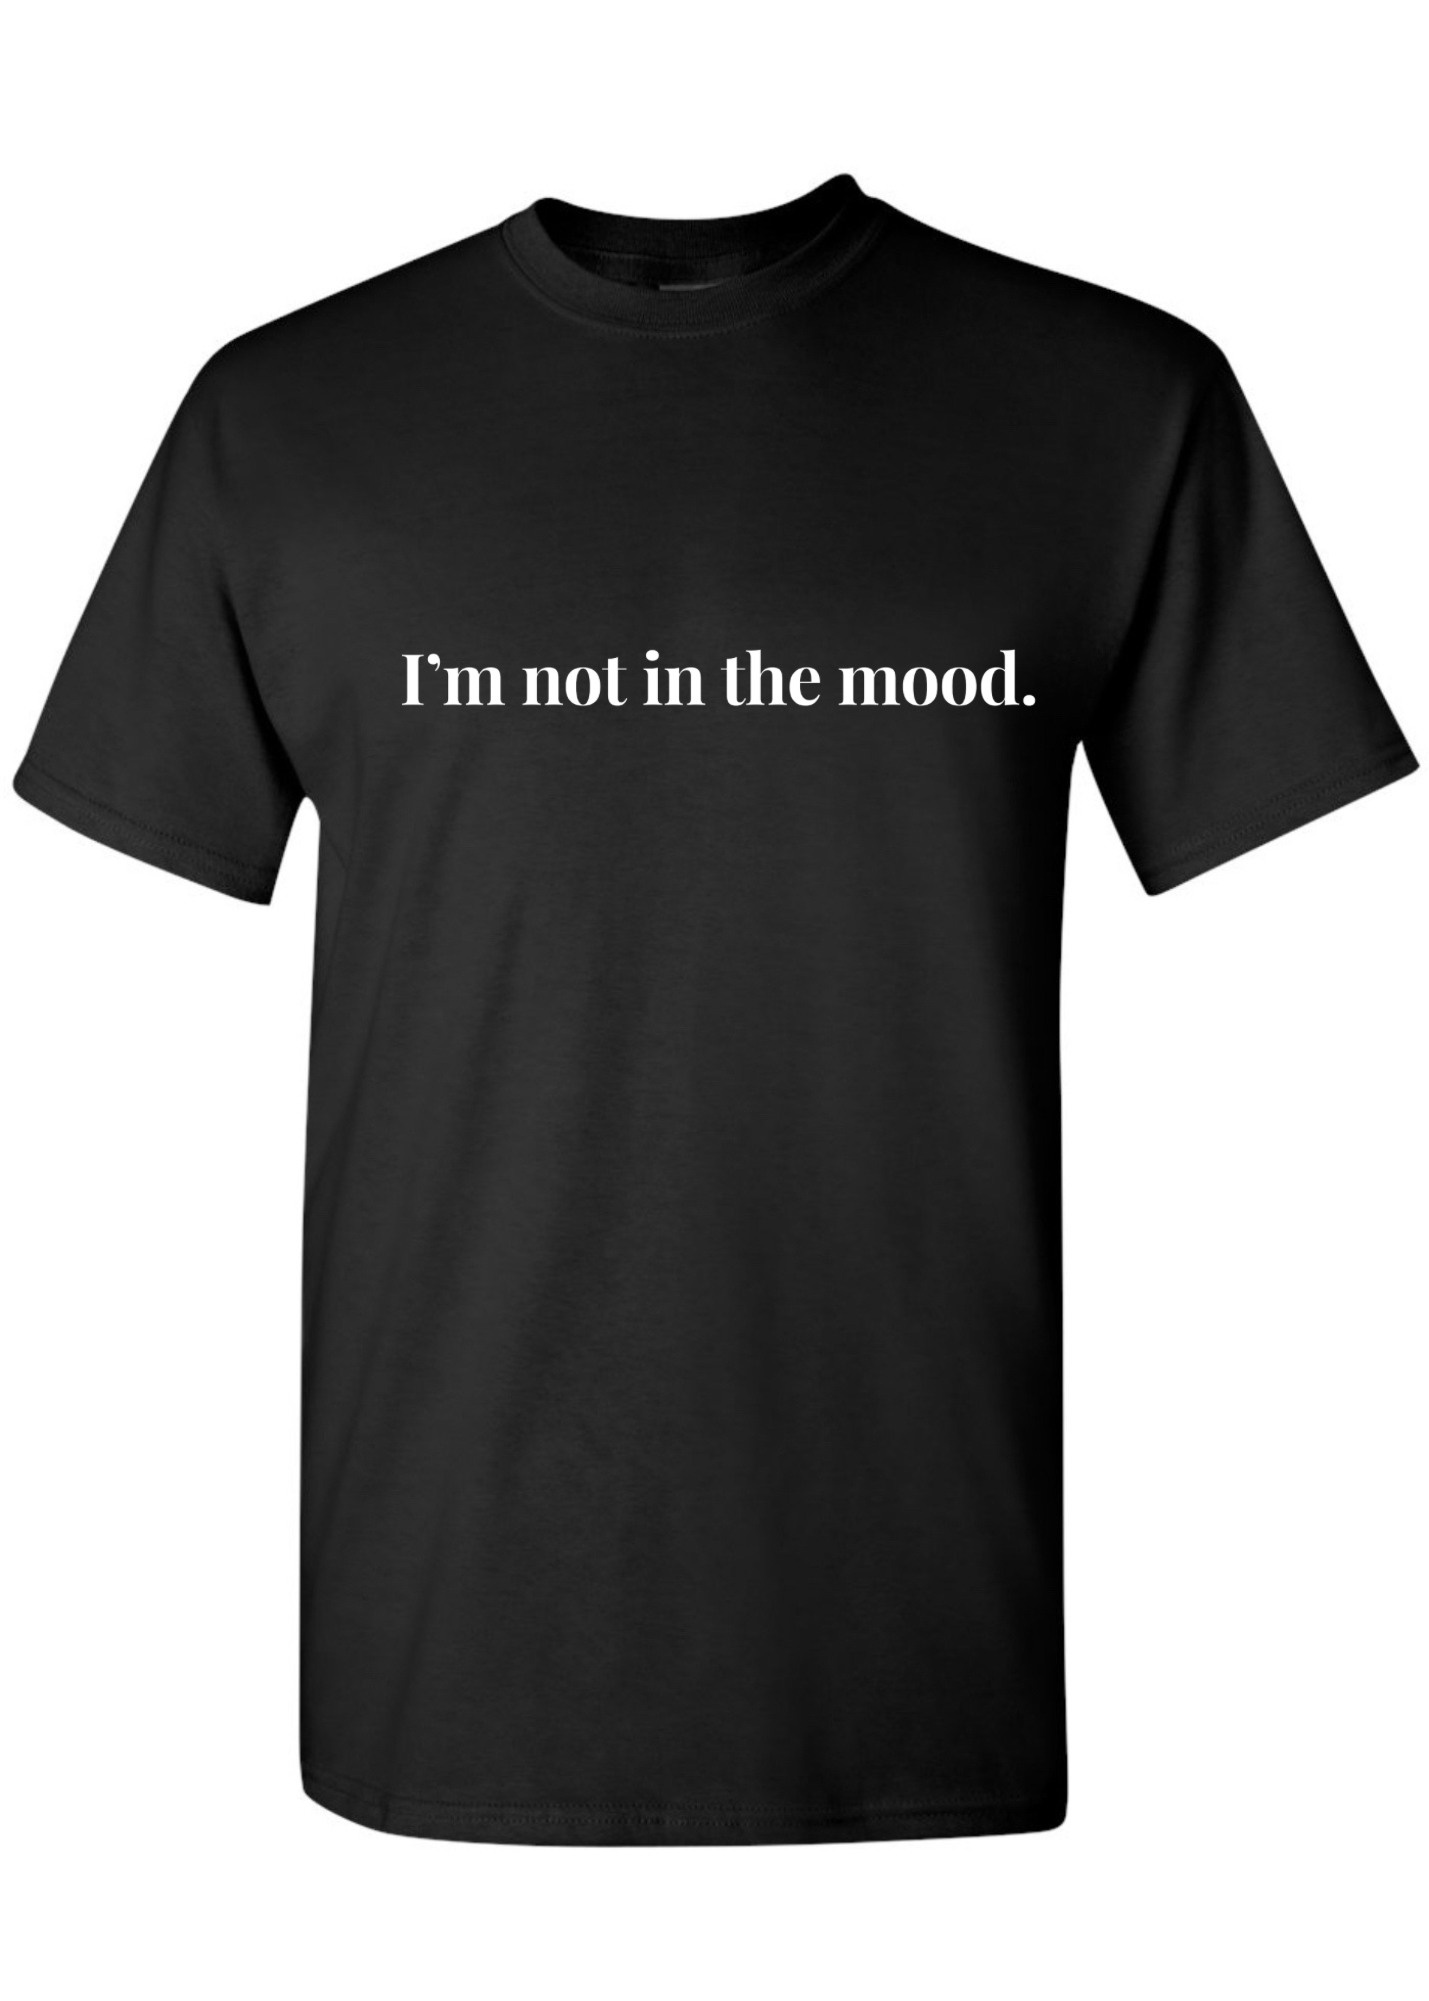 I’m not in the mood. Tee